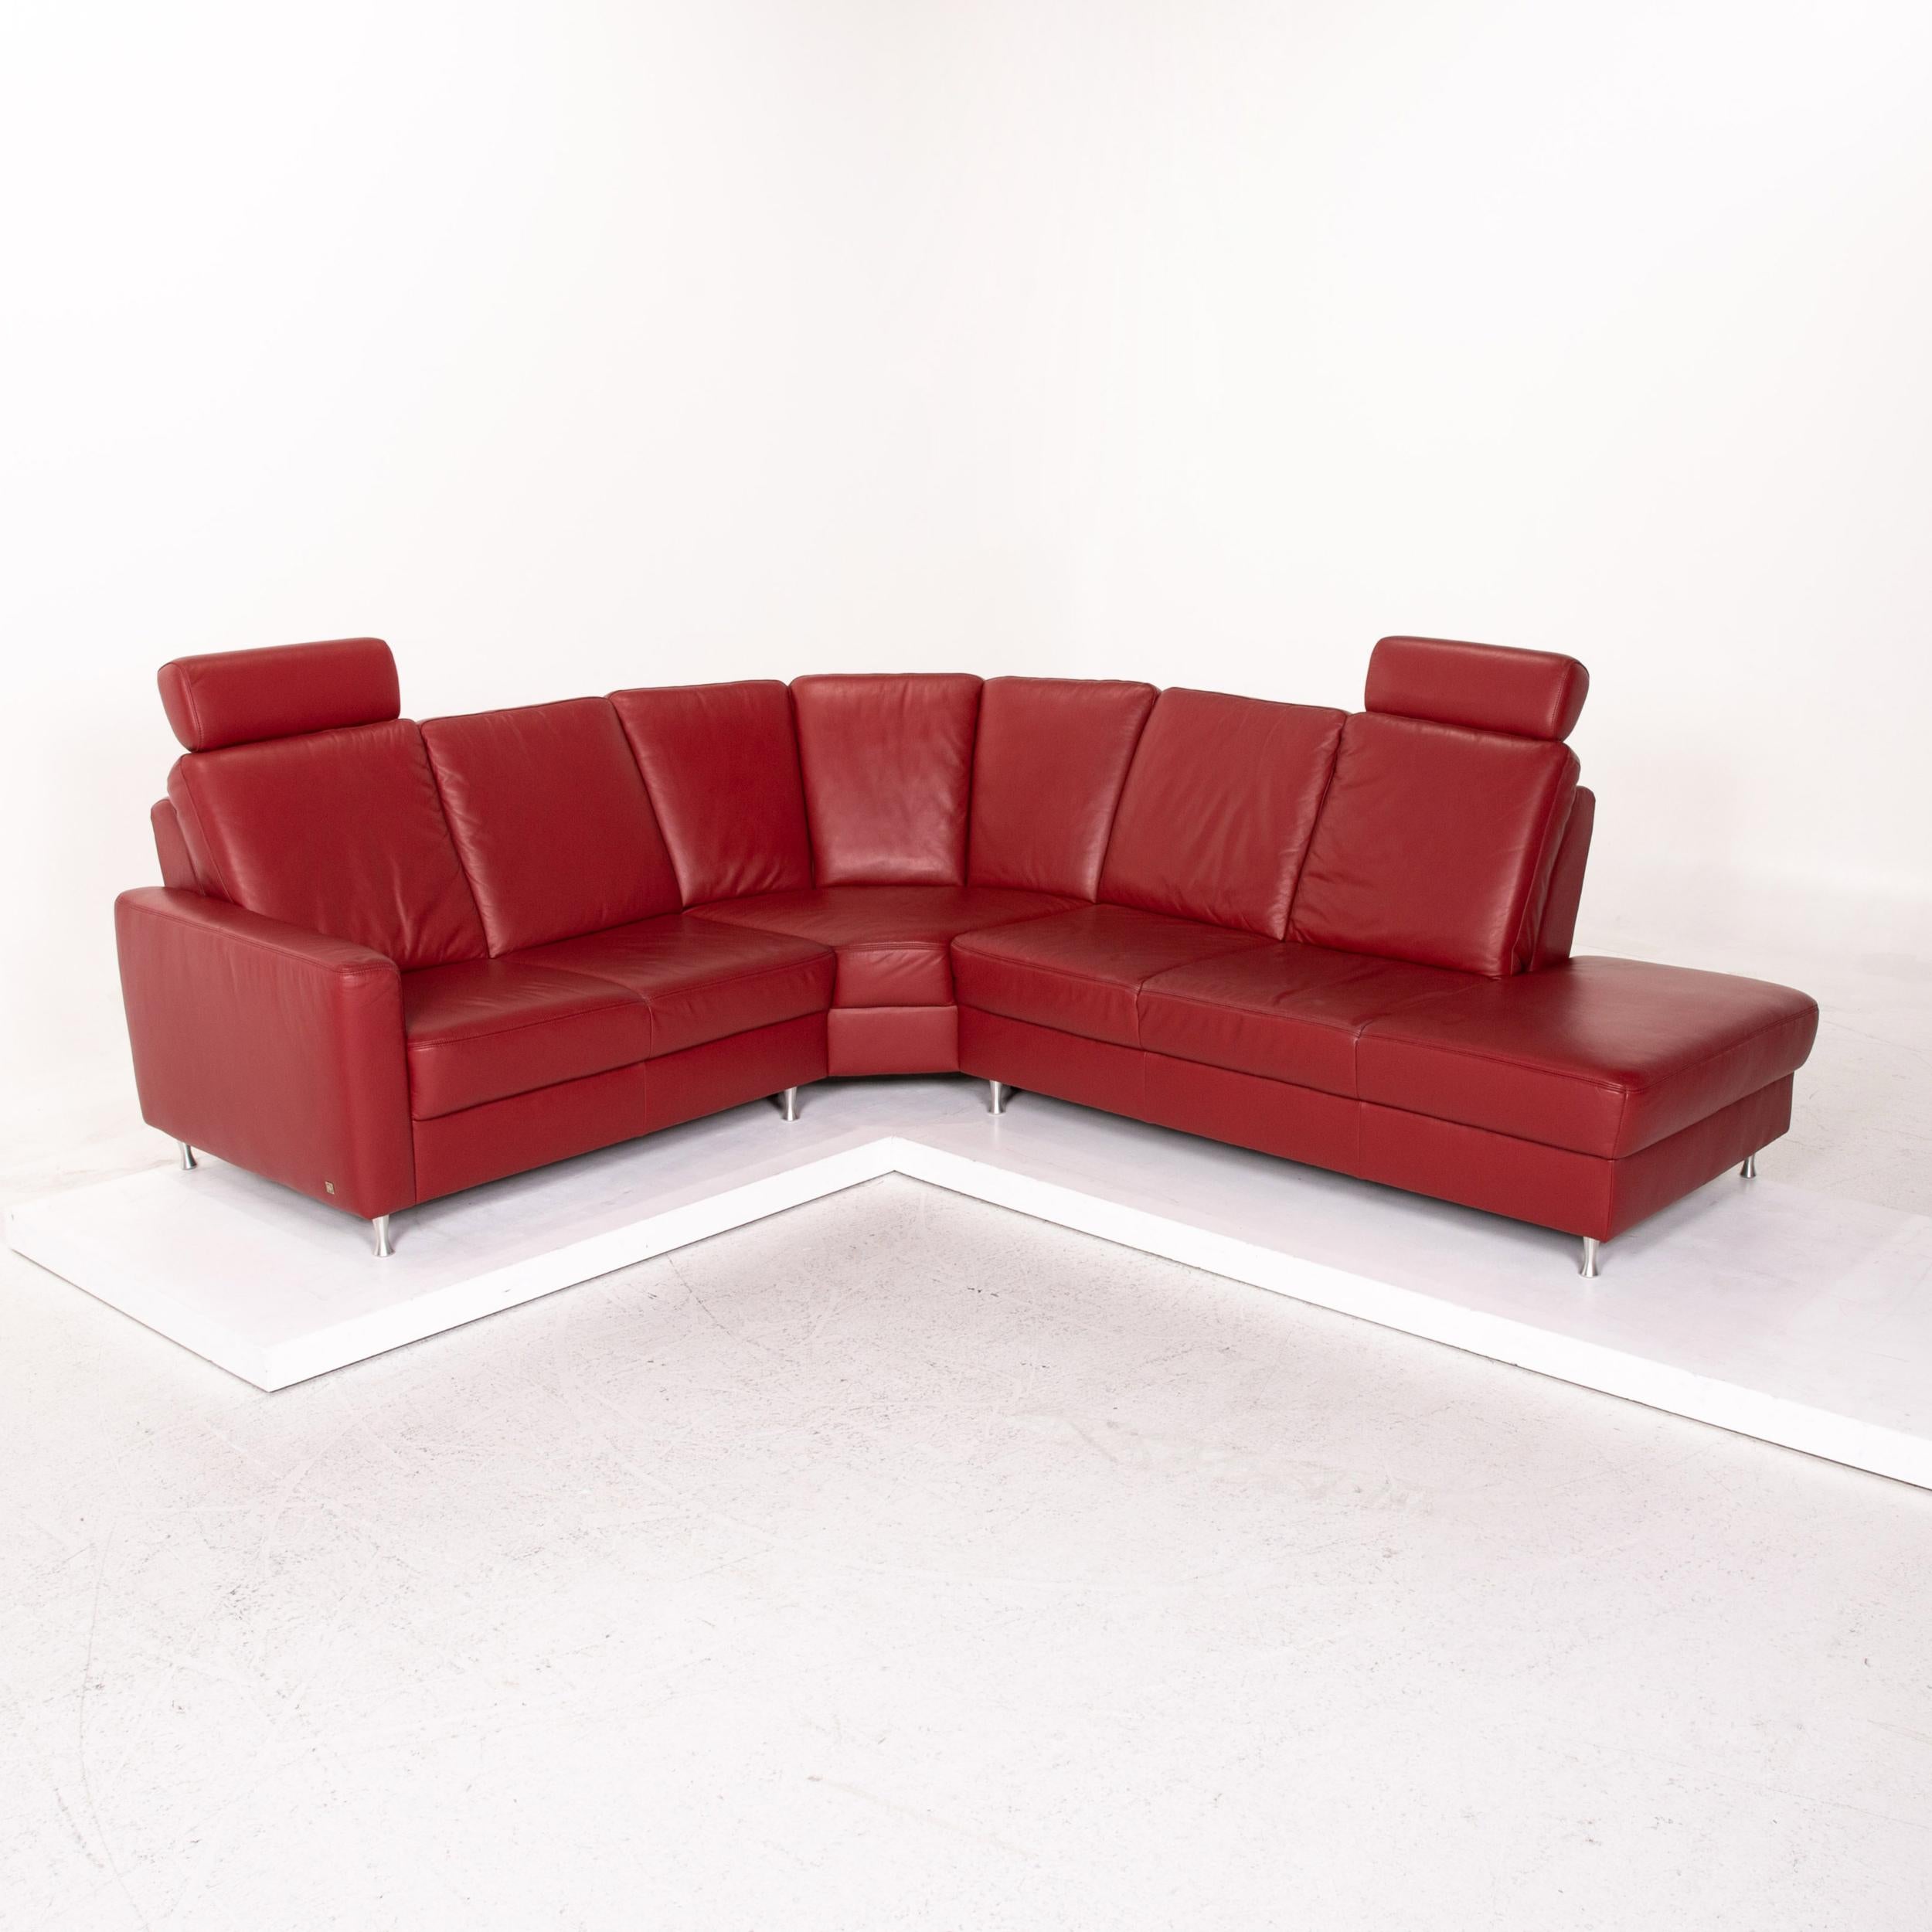 Sample Ring Leather Corner Sofa Red Dark Red Sofa Function Couch For Sale 3